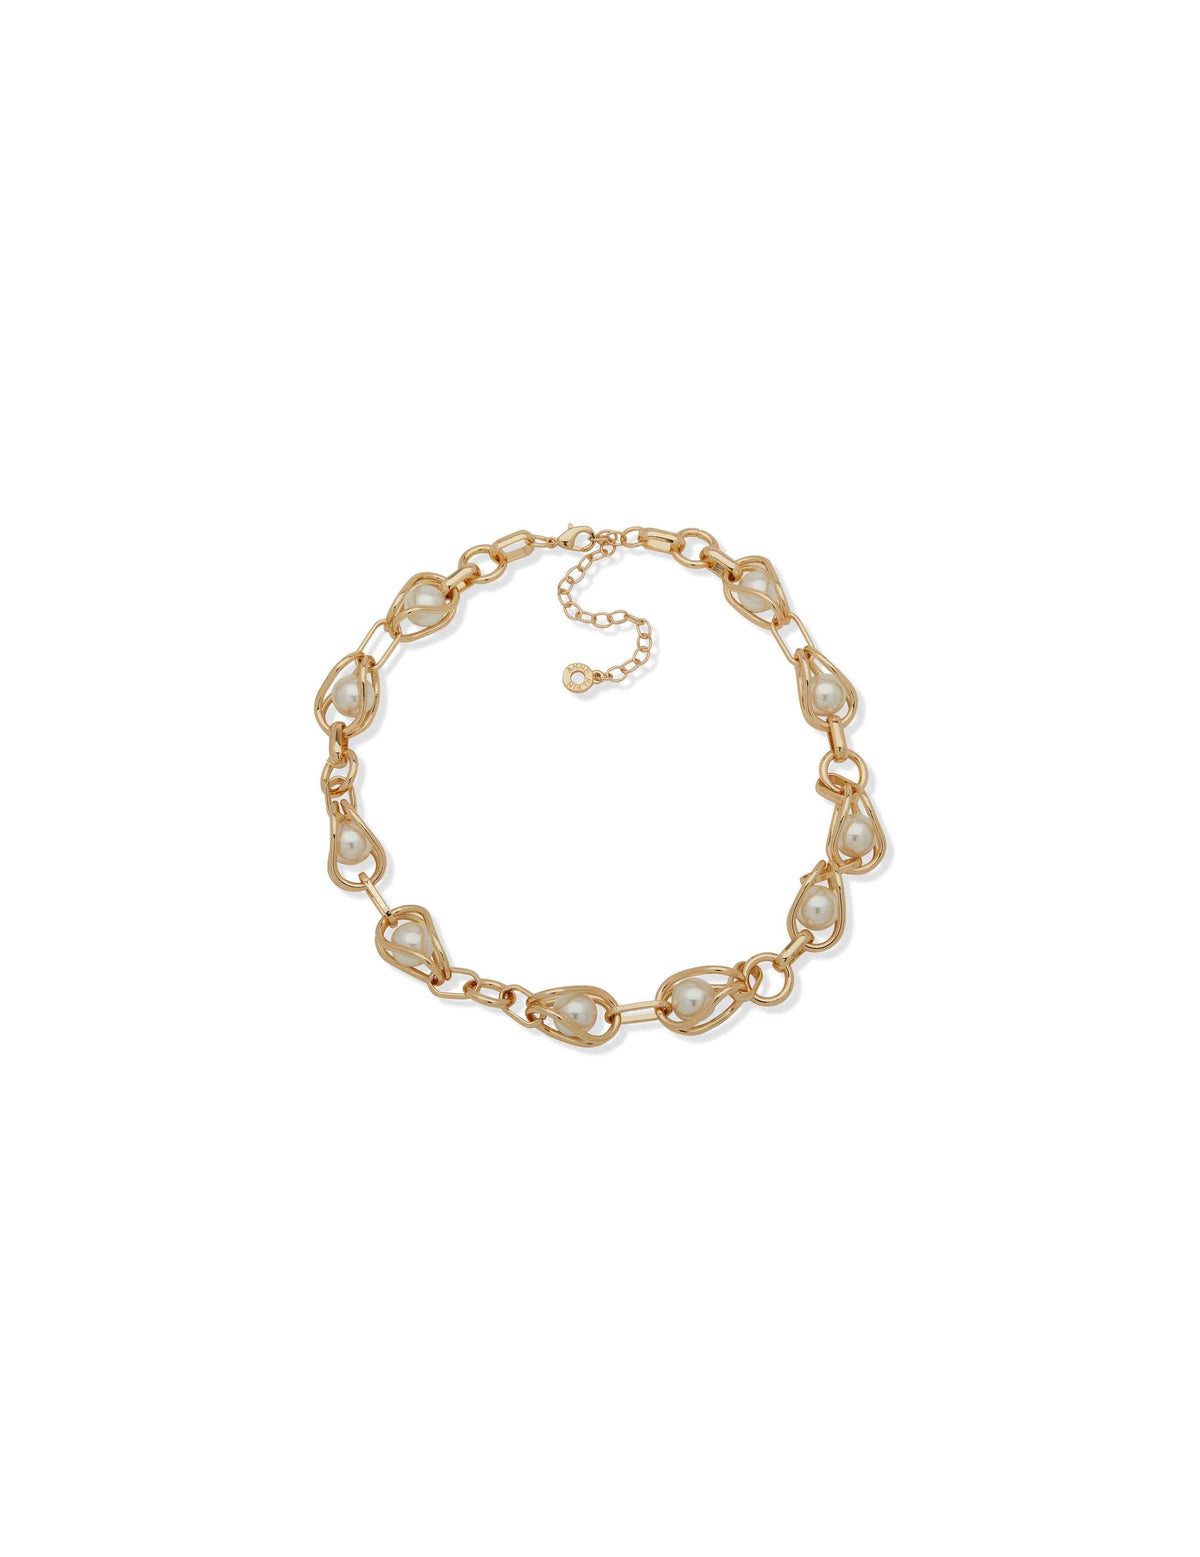 Anne Klein Gold Tone Faux Pearl Link Collar Necklace